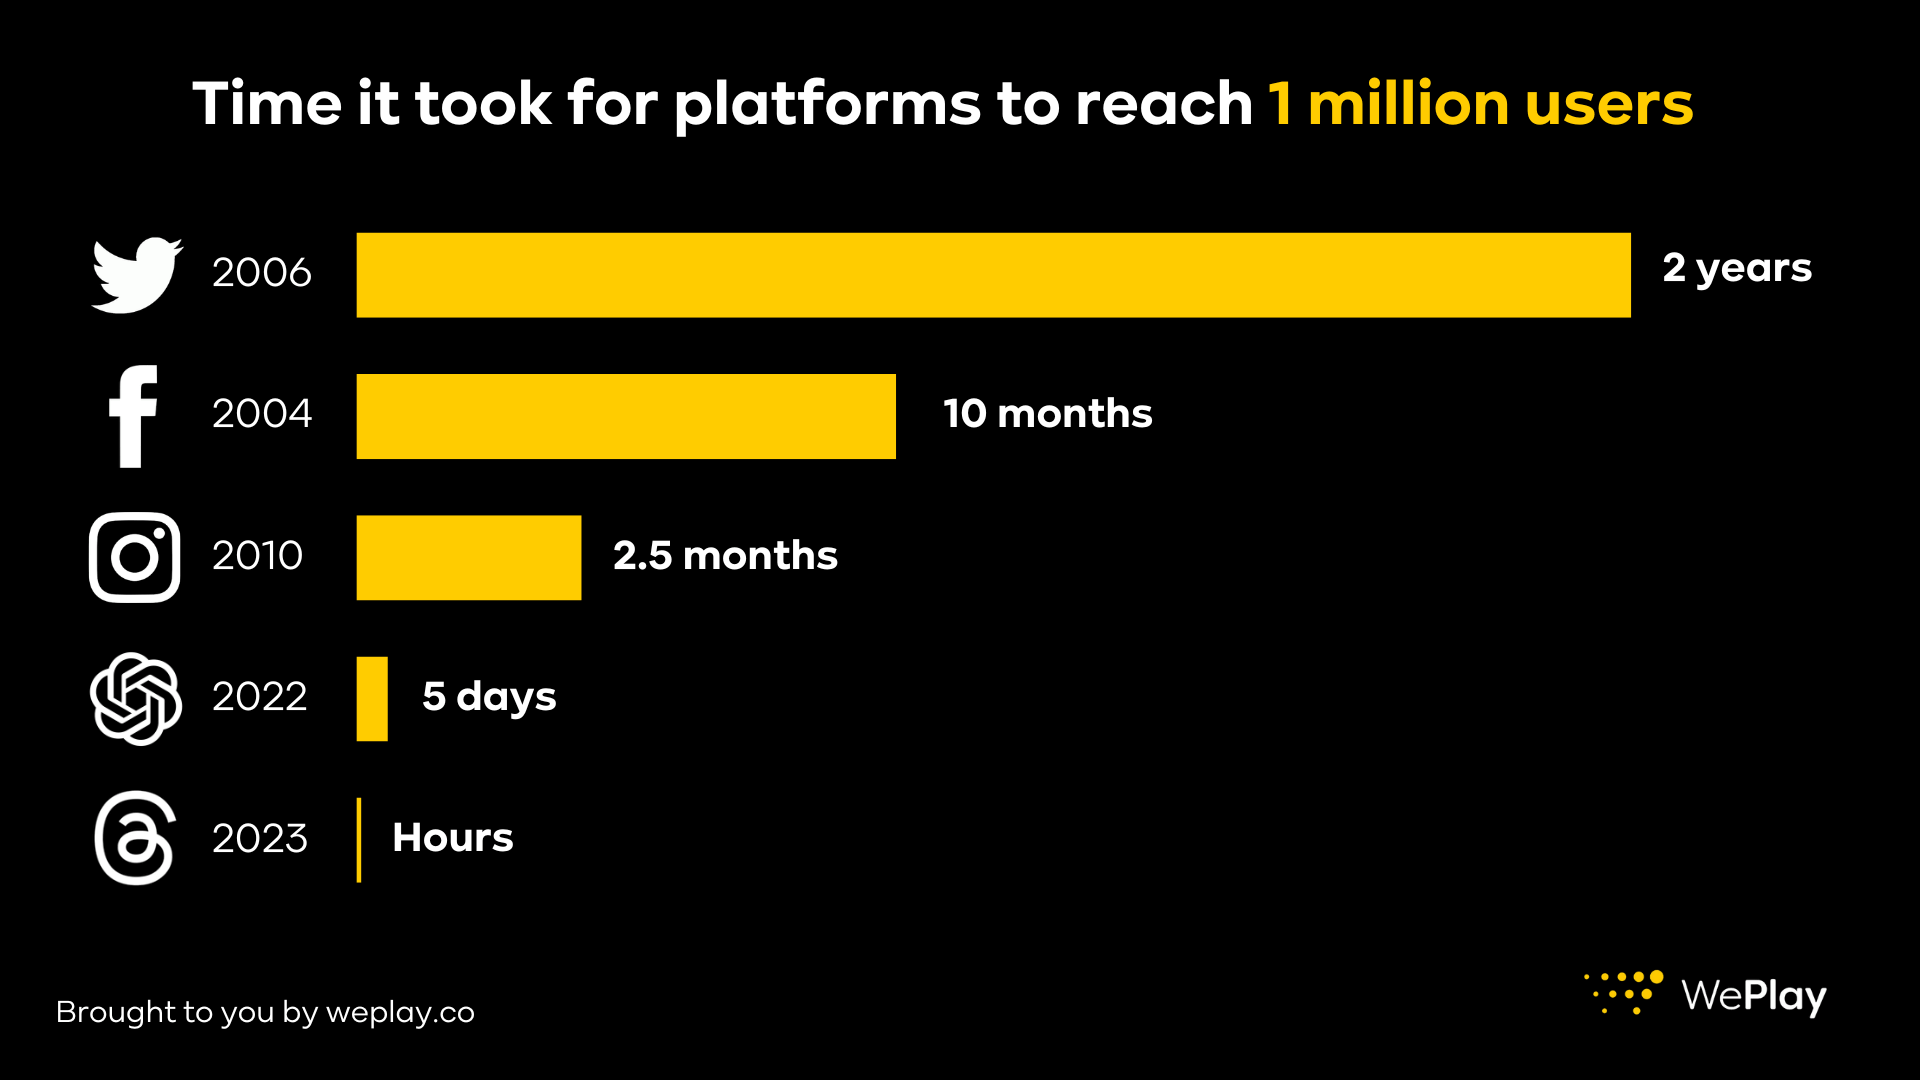 graph showing the time it took each platform to reach 1 million users with Threads only taking a few hours compared to years 